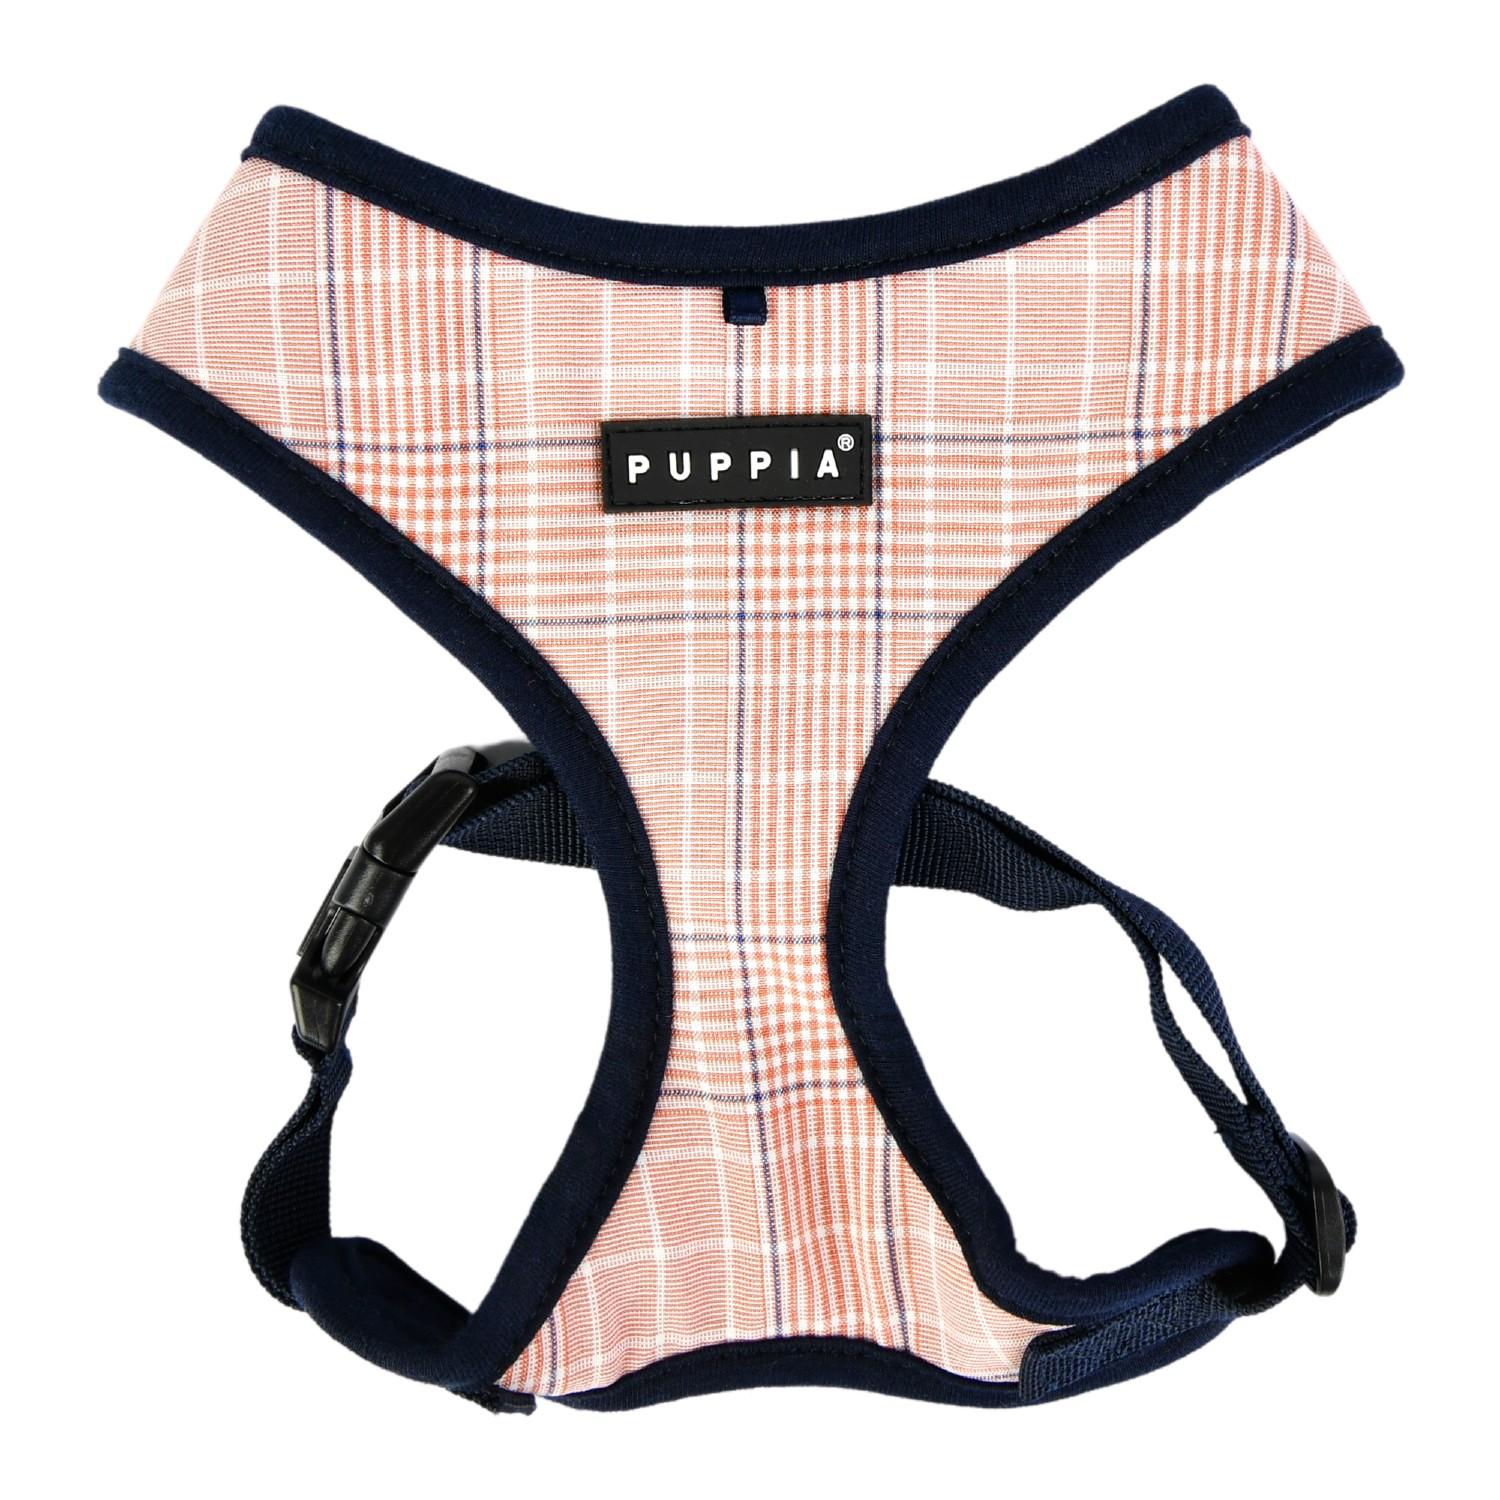 Blake Adjustable Dog Harness by Puppia - Navy